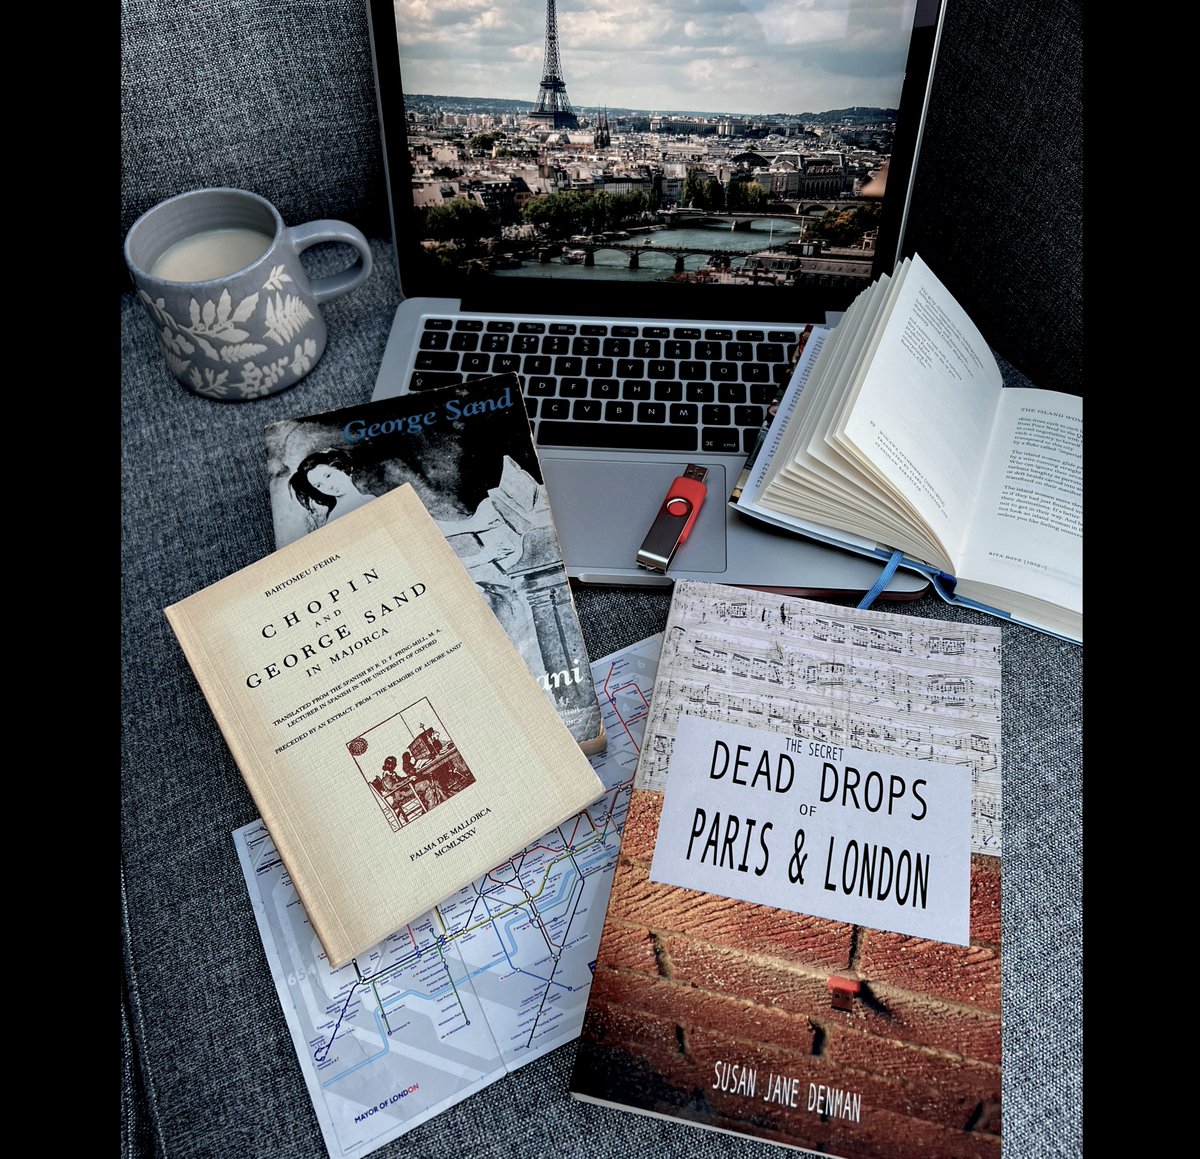 When a music score thought to have been written by Frédéric Chopin is unearthed, a group of villains fight it out to lay claims on it. Can Clarissa solve the Dead Drop clues and locate it before she is arrested for murder?
#thrillernovels, #romancenovels, #chopin, #georgesand.